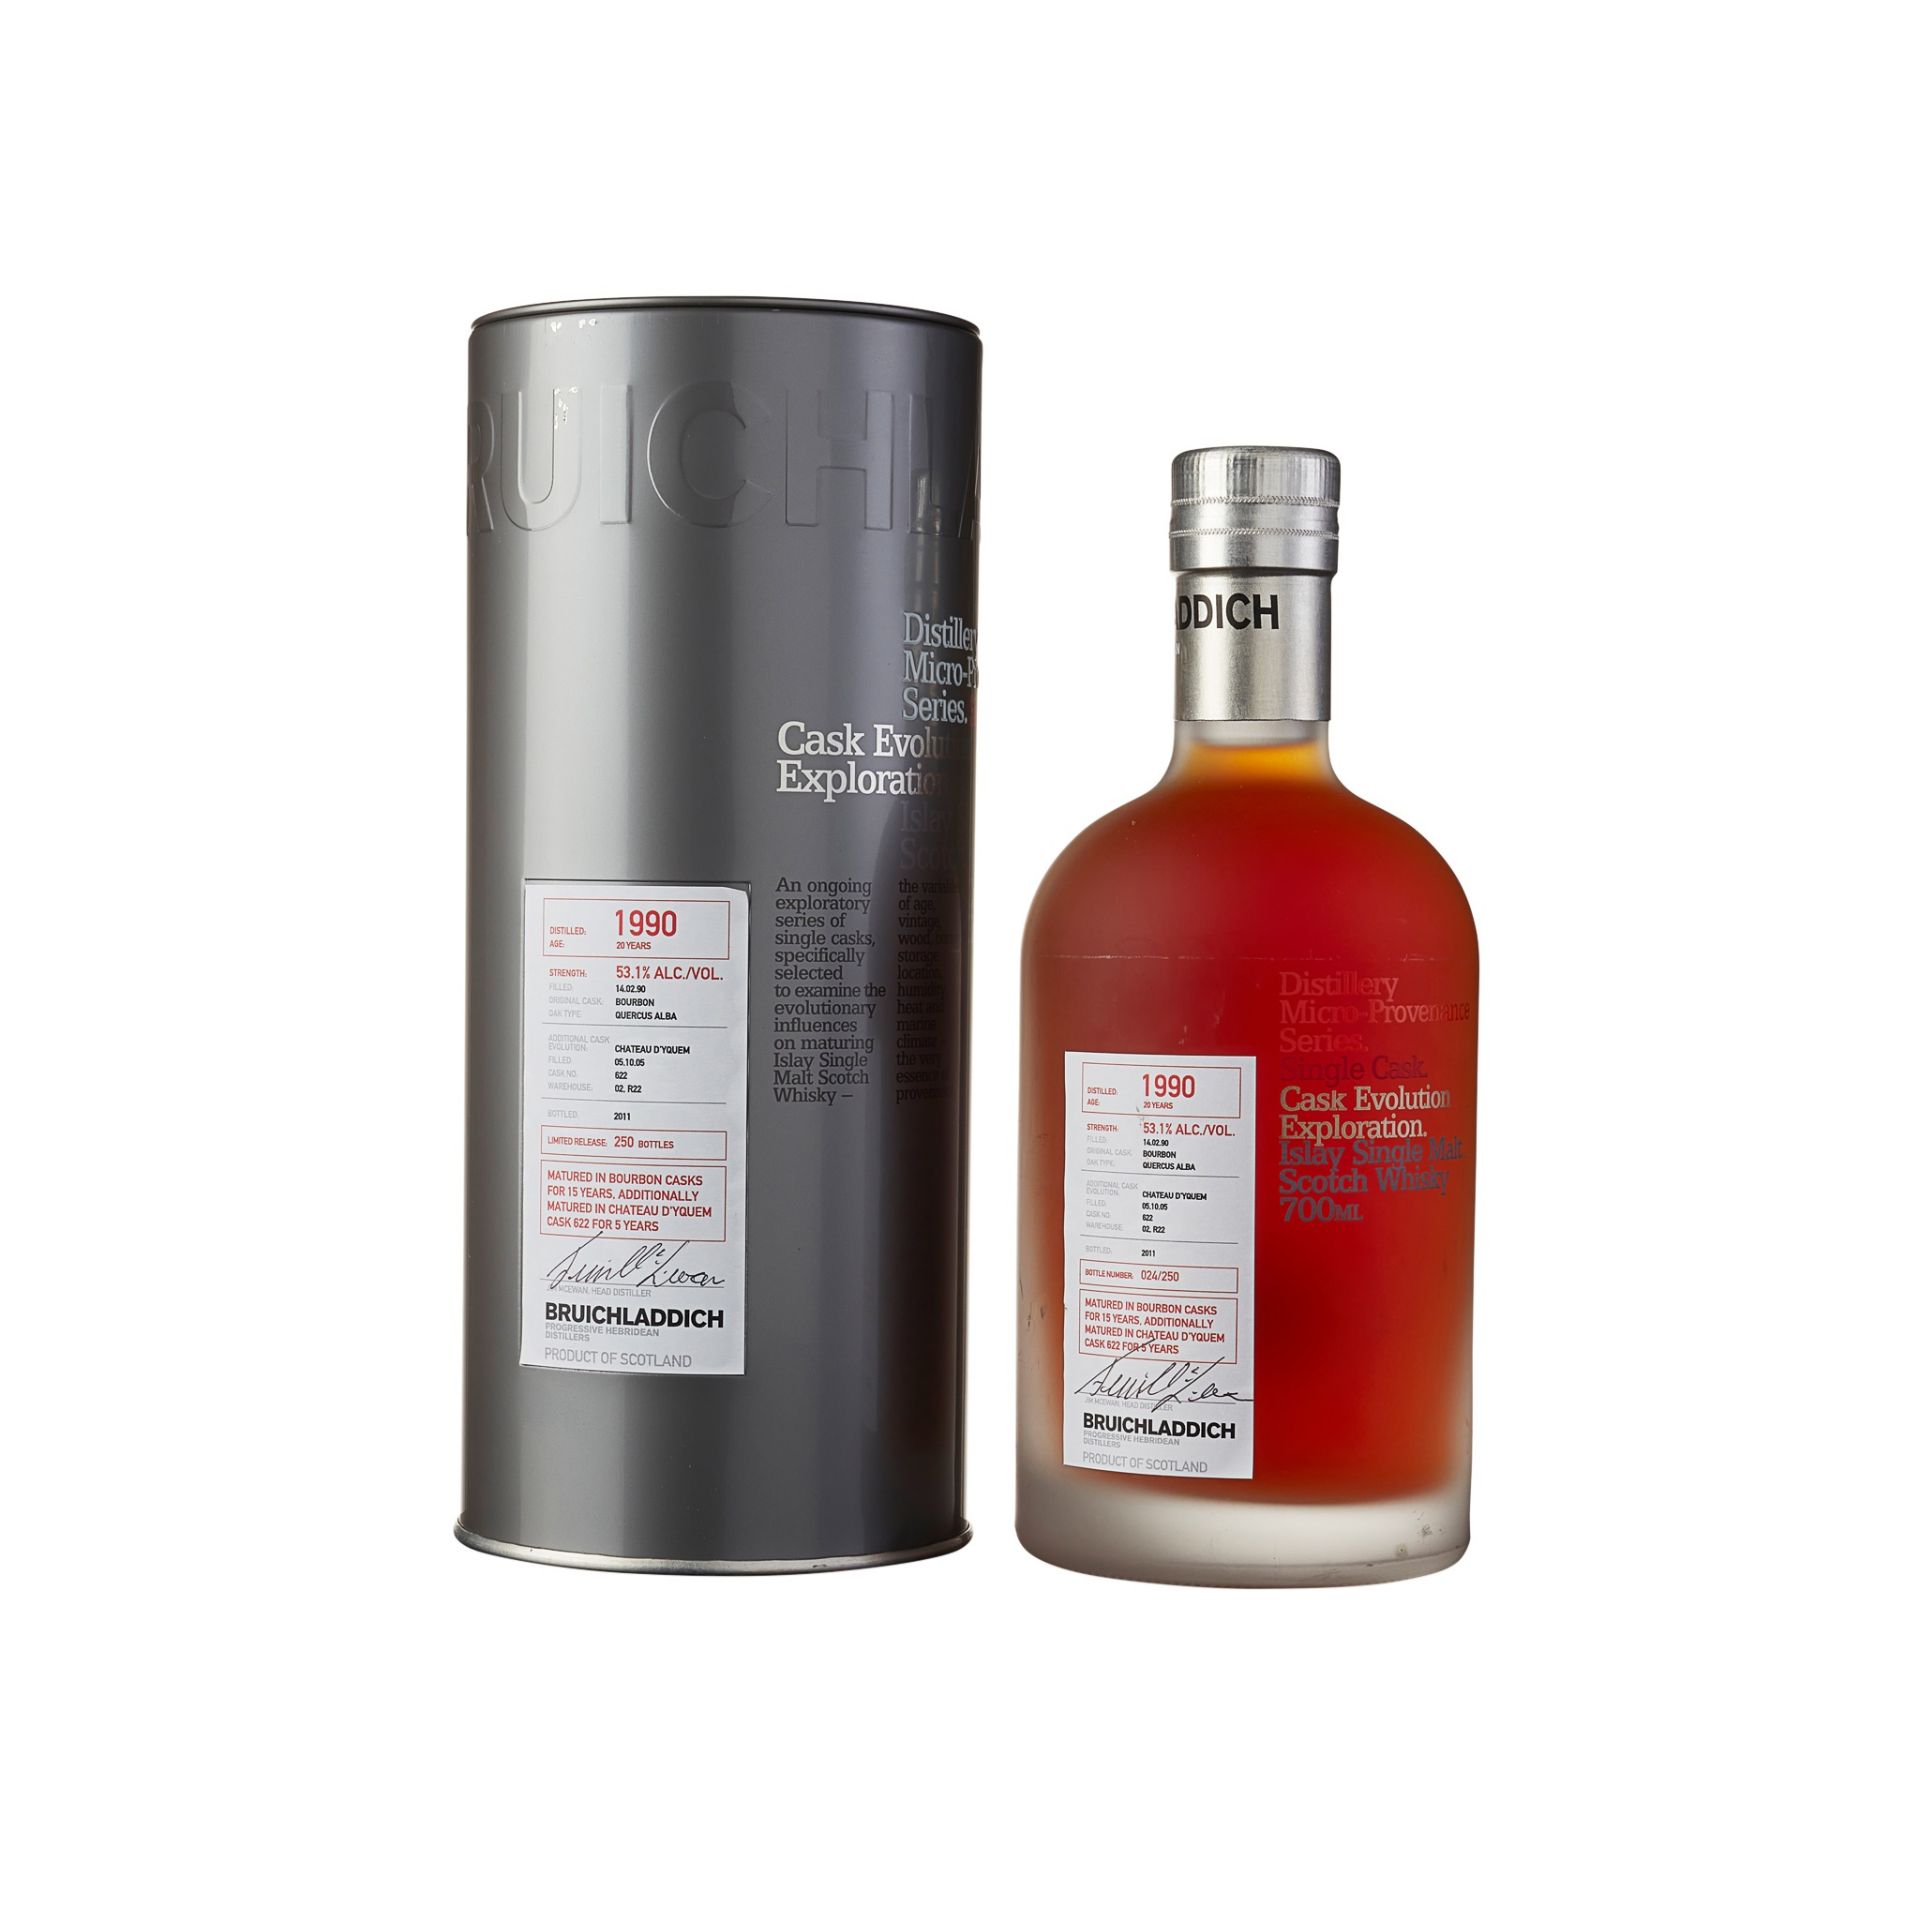 BRUICHLADDICH 1990 20 YEAR OLD MICRO-PROVENANCE SERIES - Image 2 of 3